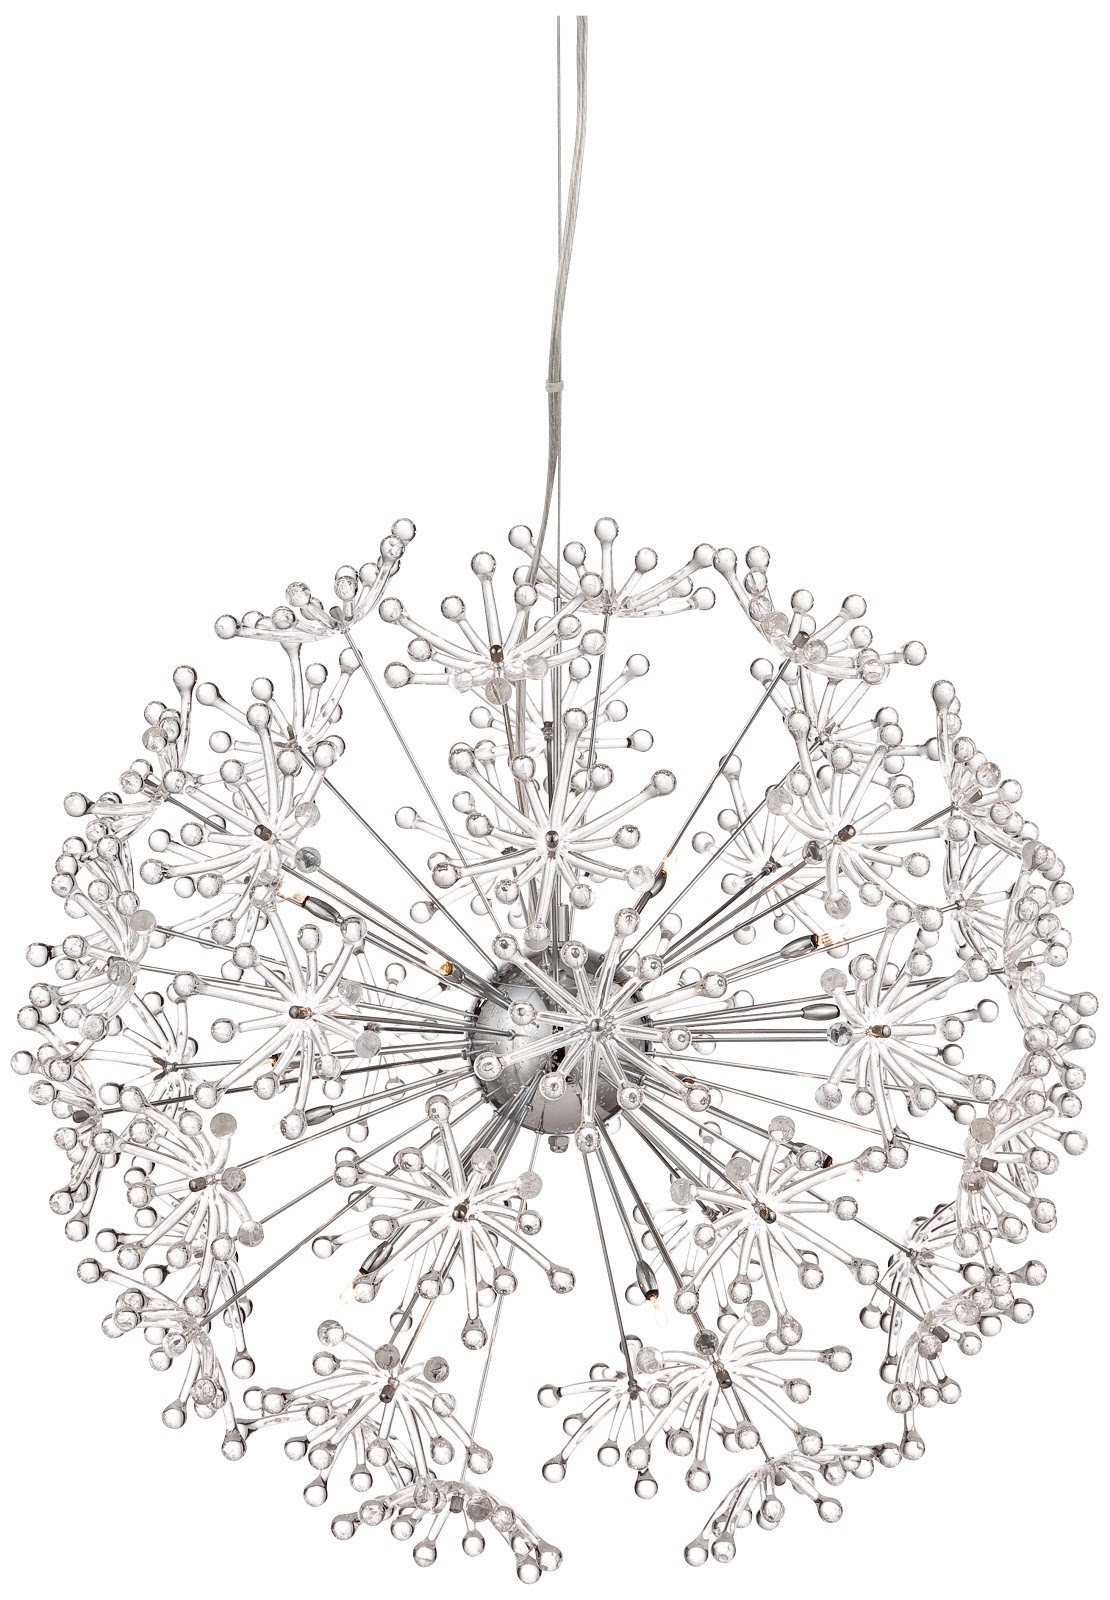 Dainty Glass Crystal Chandelier - Lamps Plus - KBIS 2019